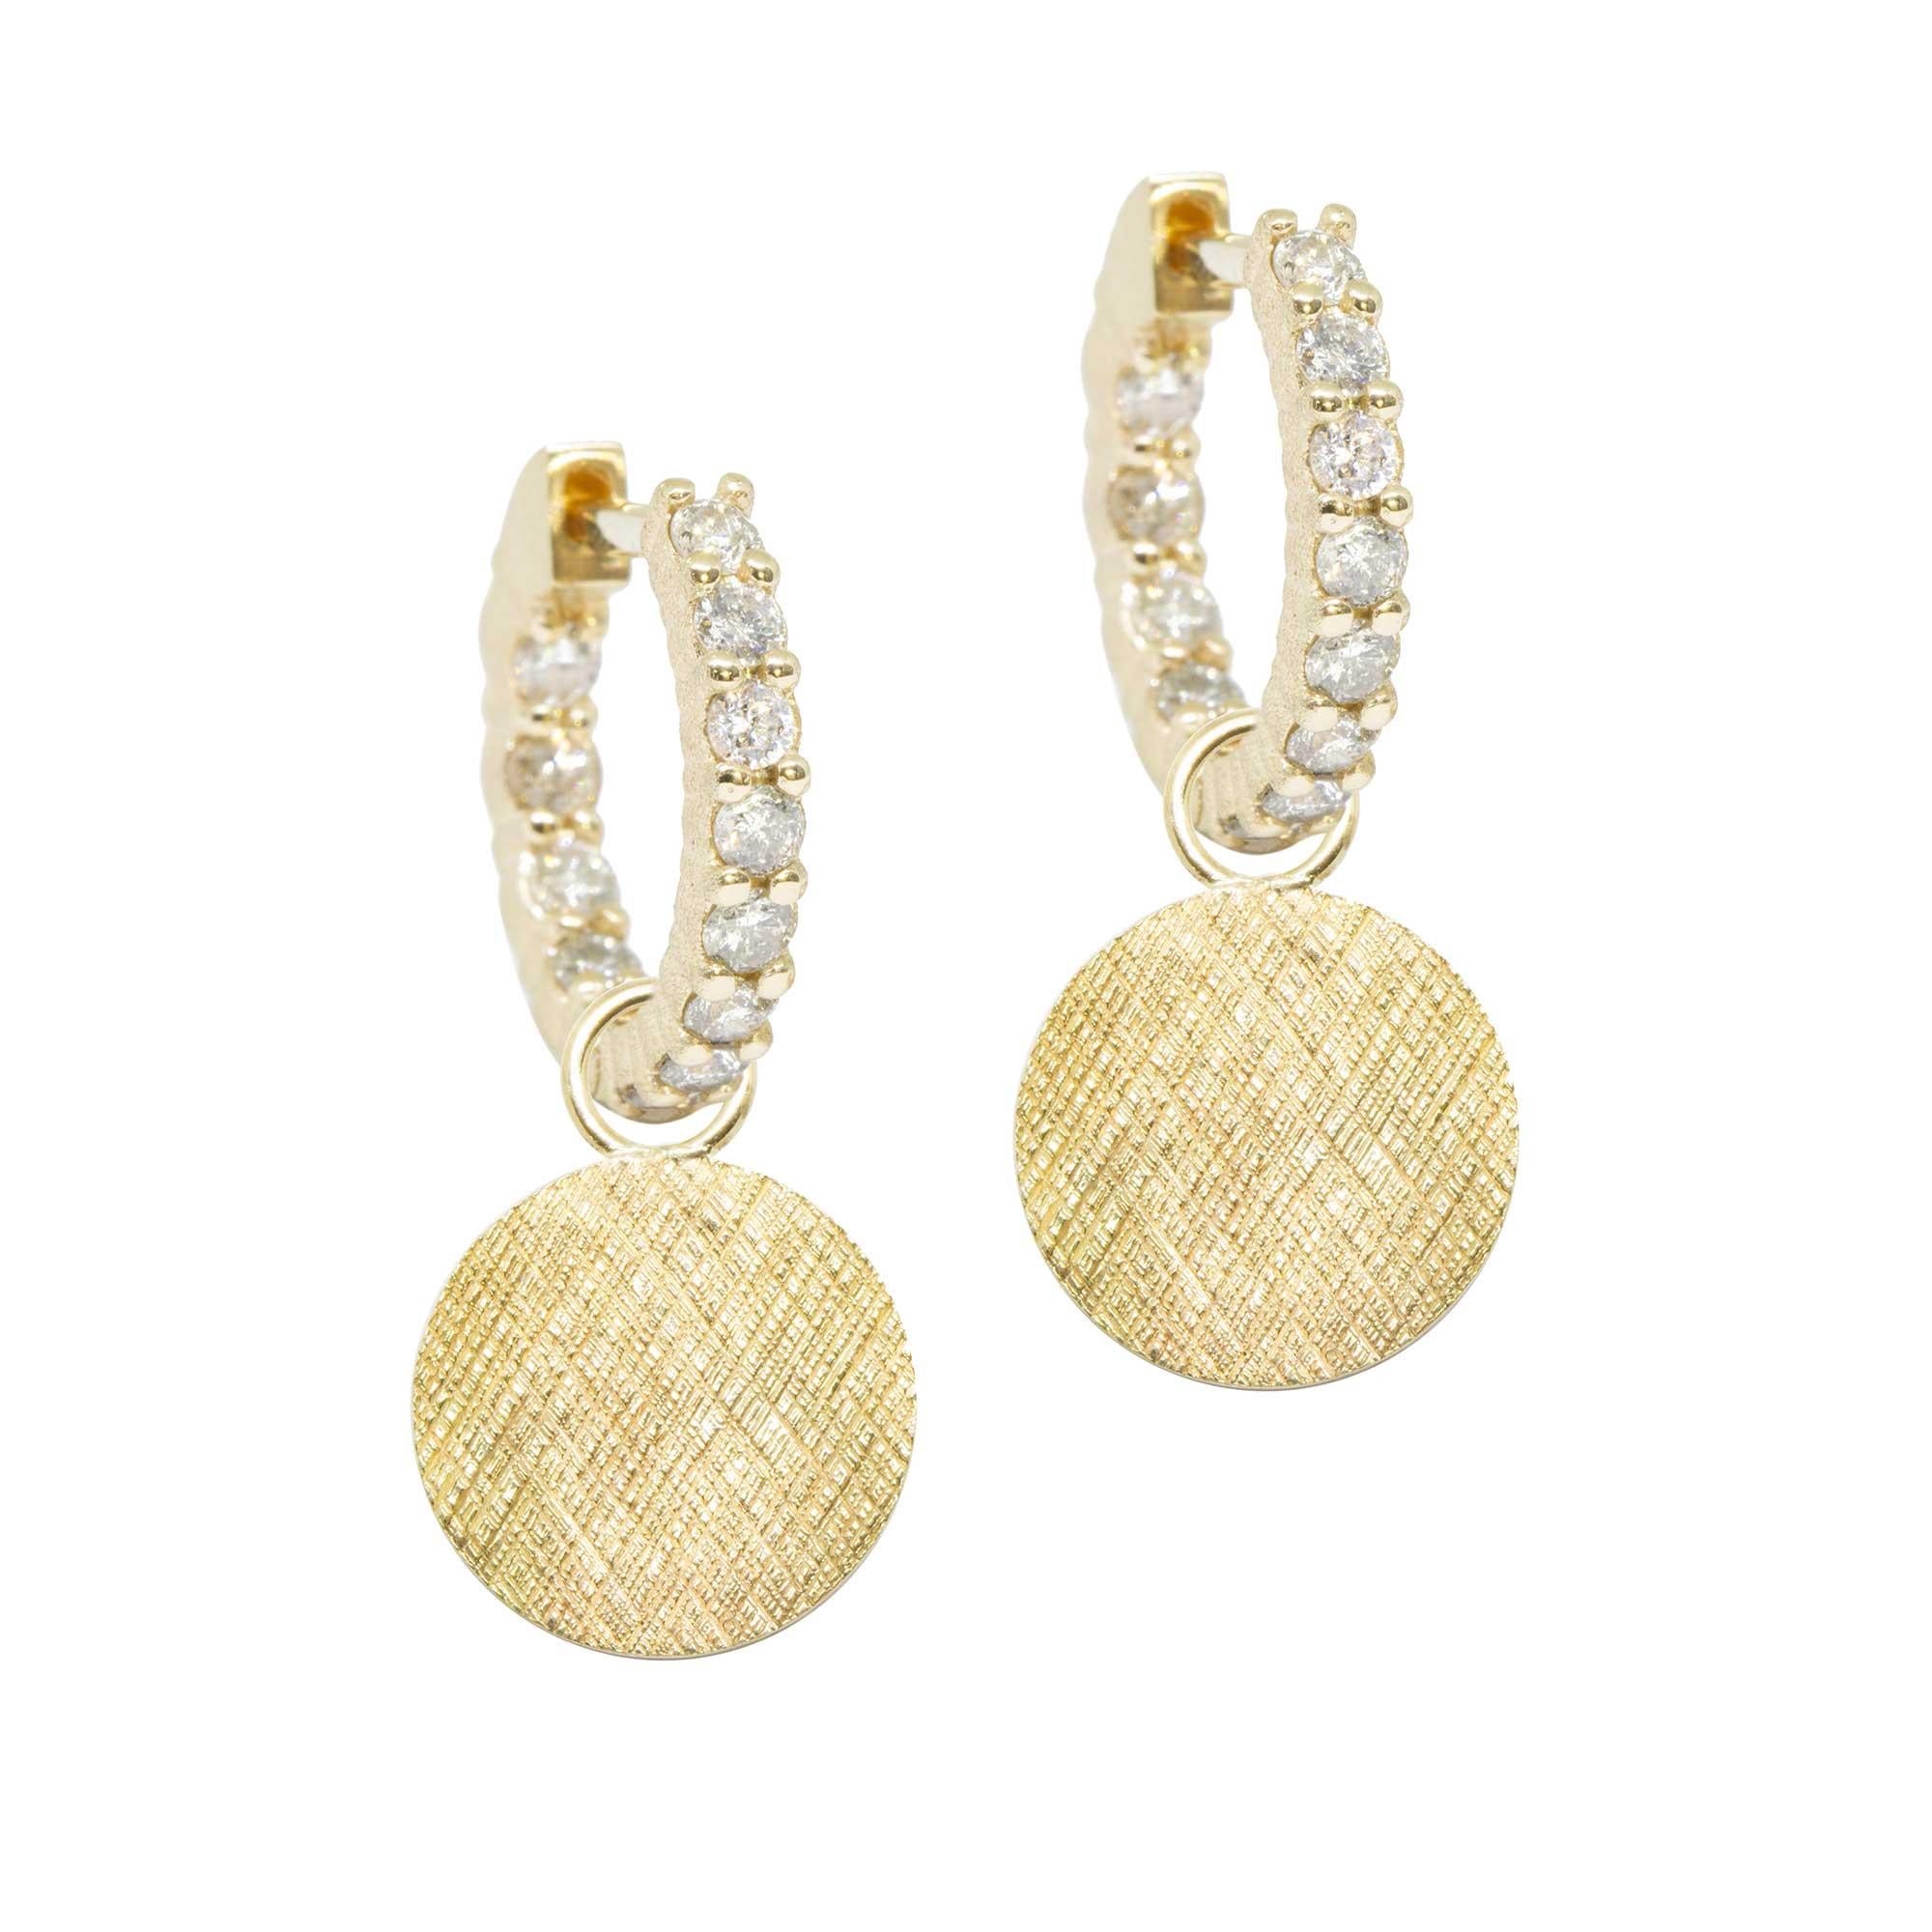 Defined by a hand-hammered crosshatch pattern, the Florentine Round 12mm Gold Charms are a jewelry wardrobe essential, and an effortless way to add some gorgeous shimmer and texture to your look. And when you mix and match with our other styles? The